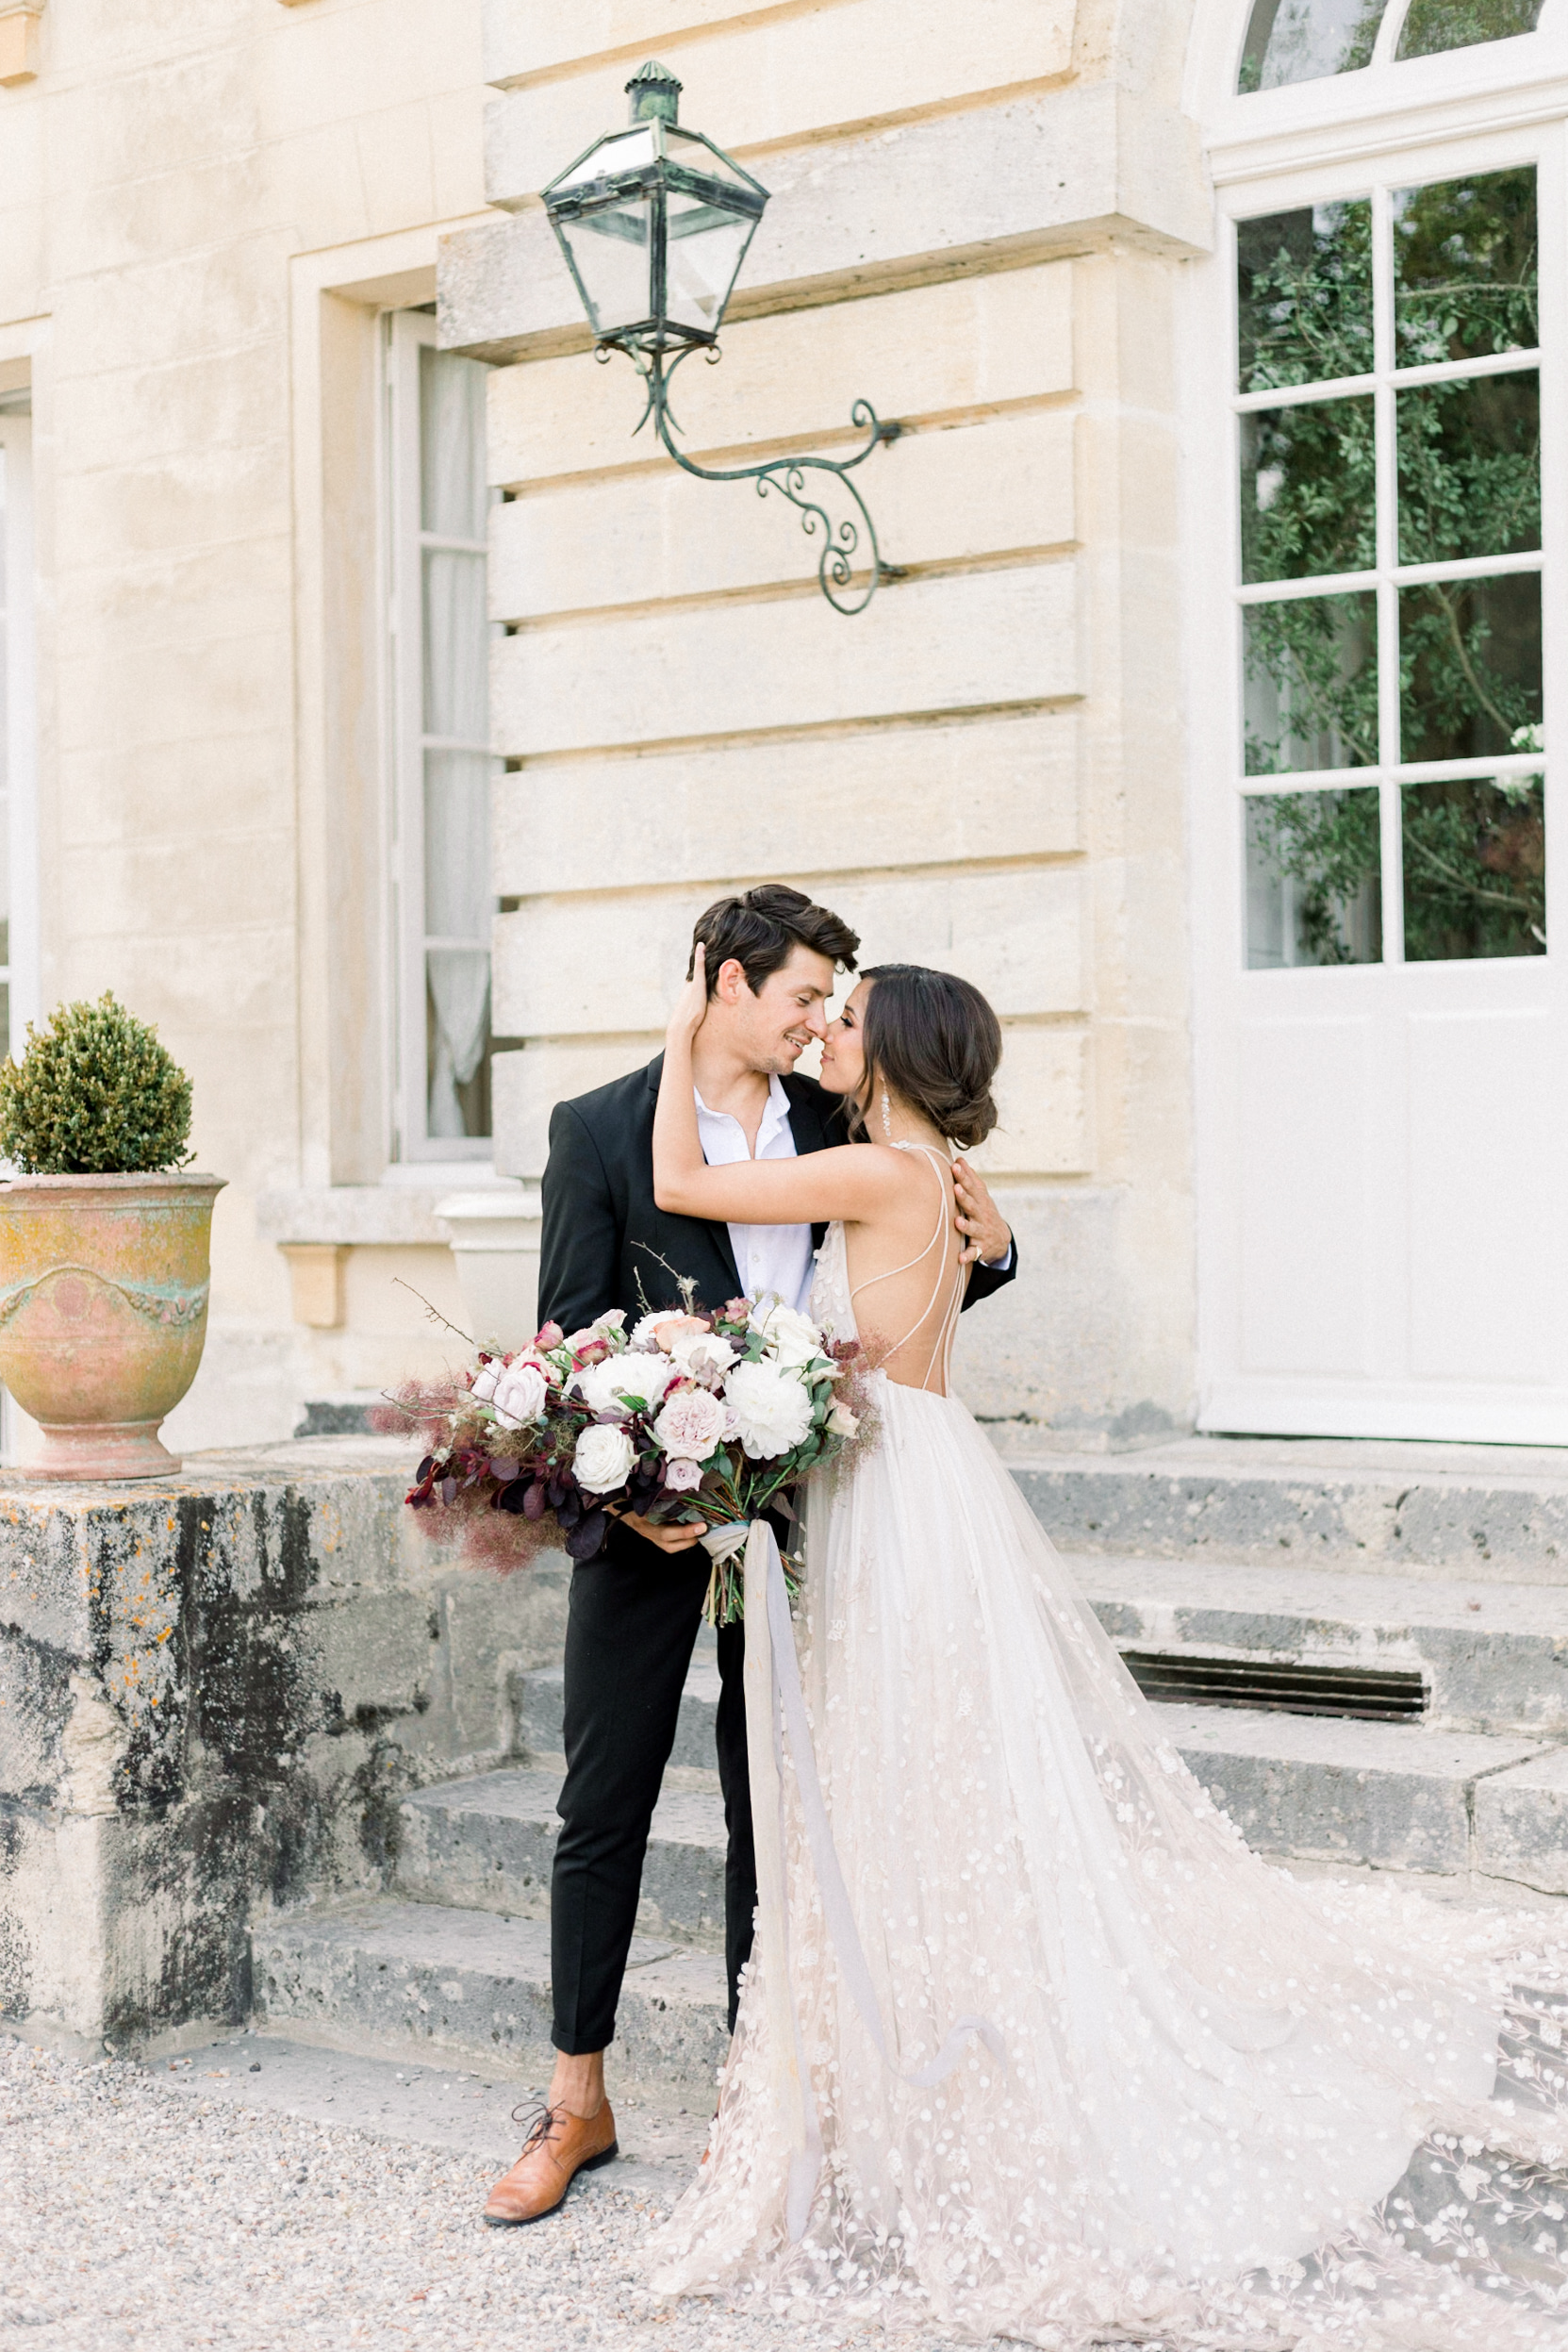 Intimate and Lush Elopement Inspiration in Normandy